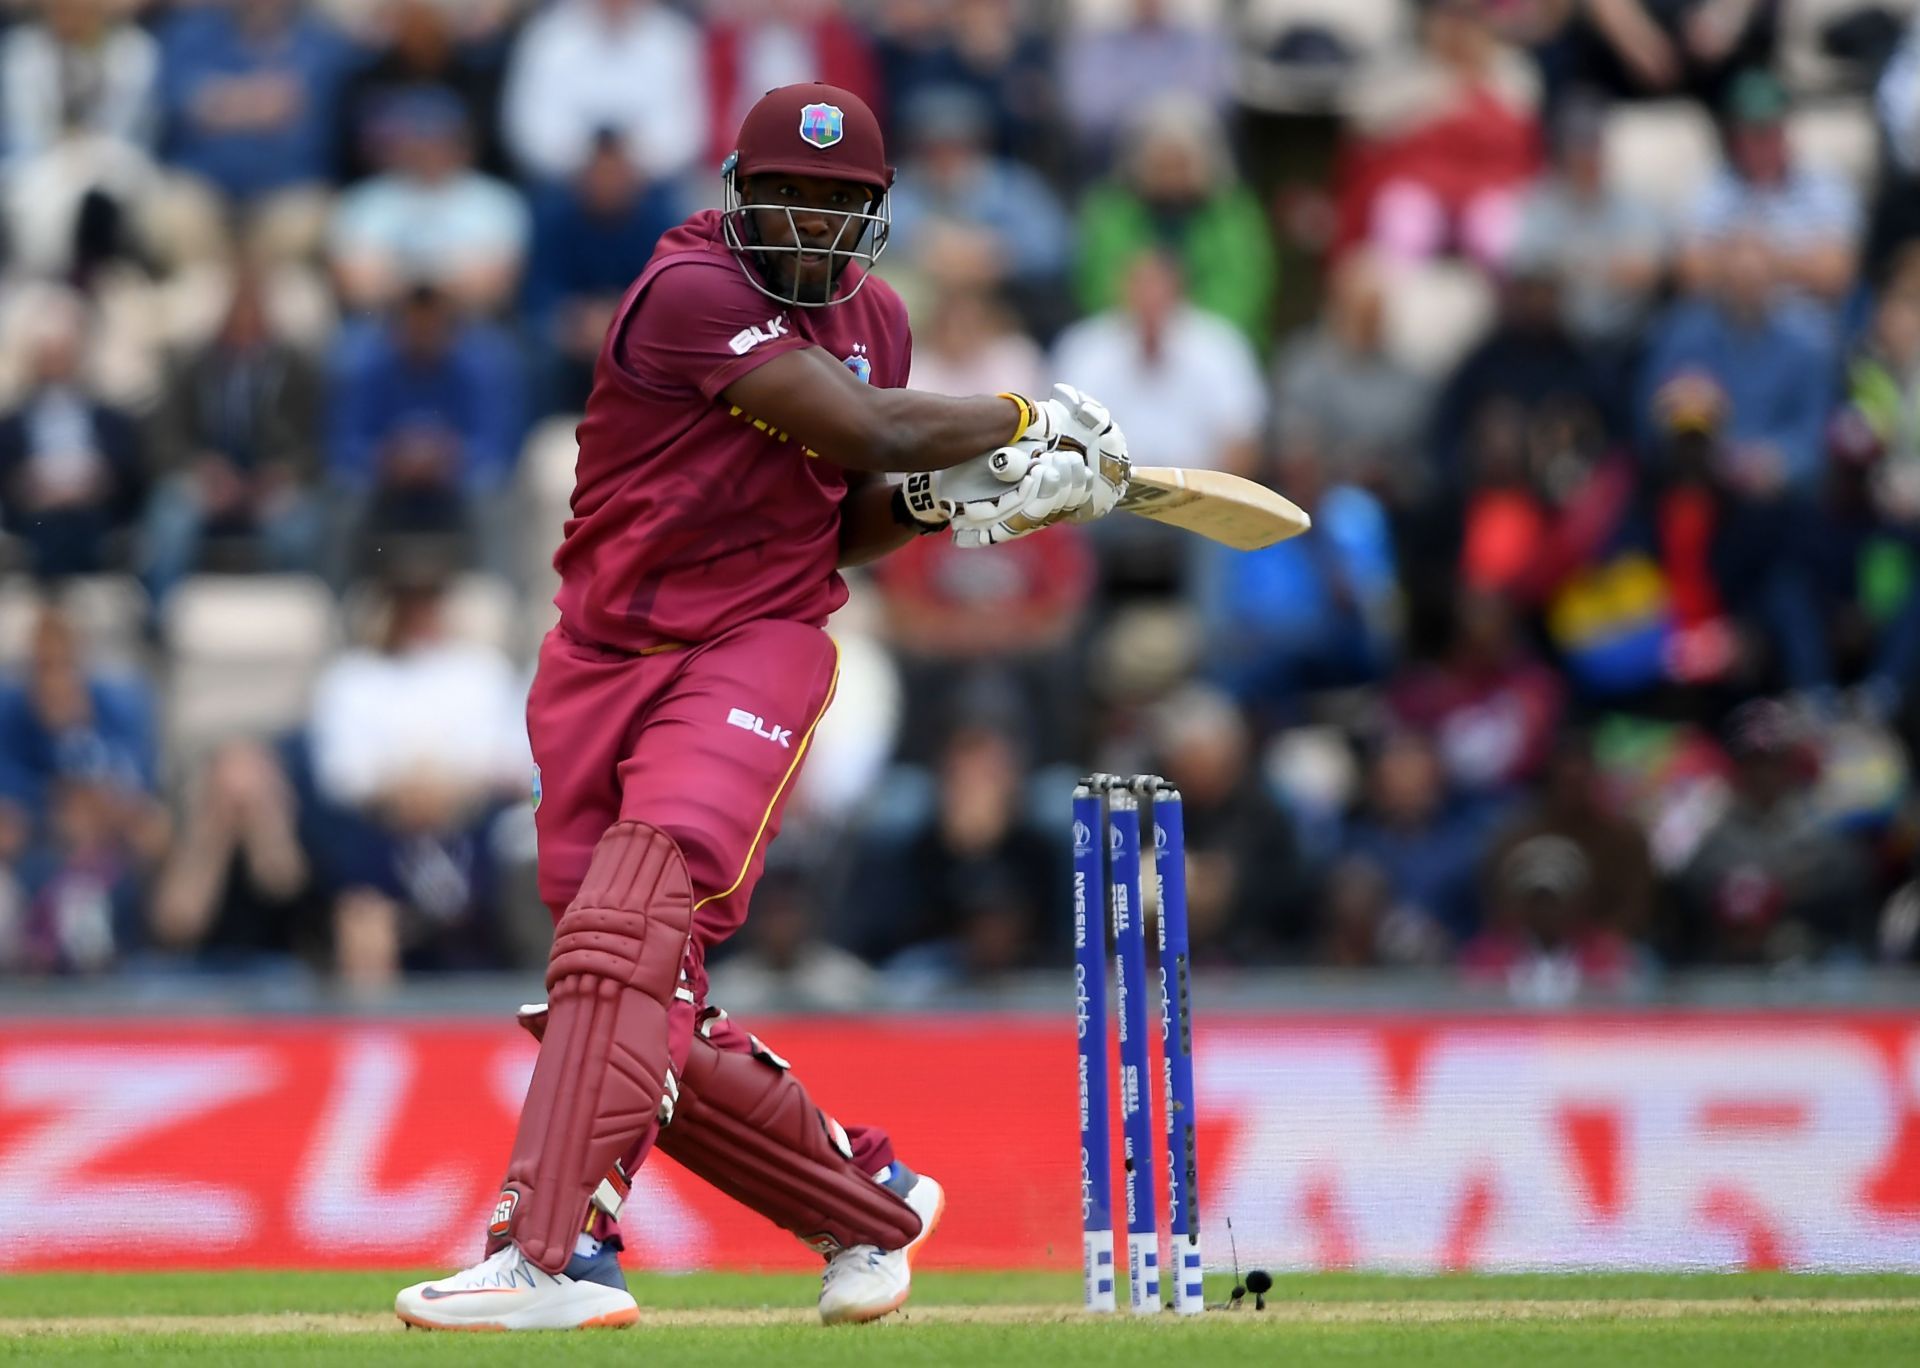 The West Indies batting has been found wanting in both warm-up matches